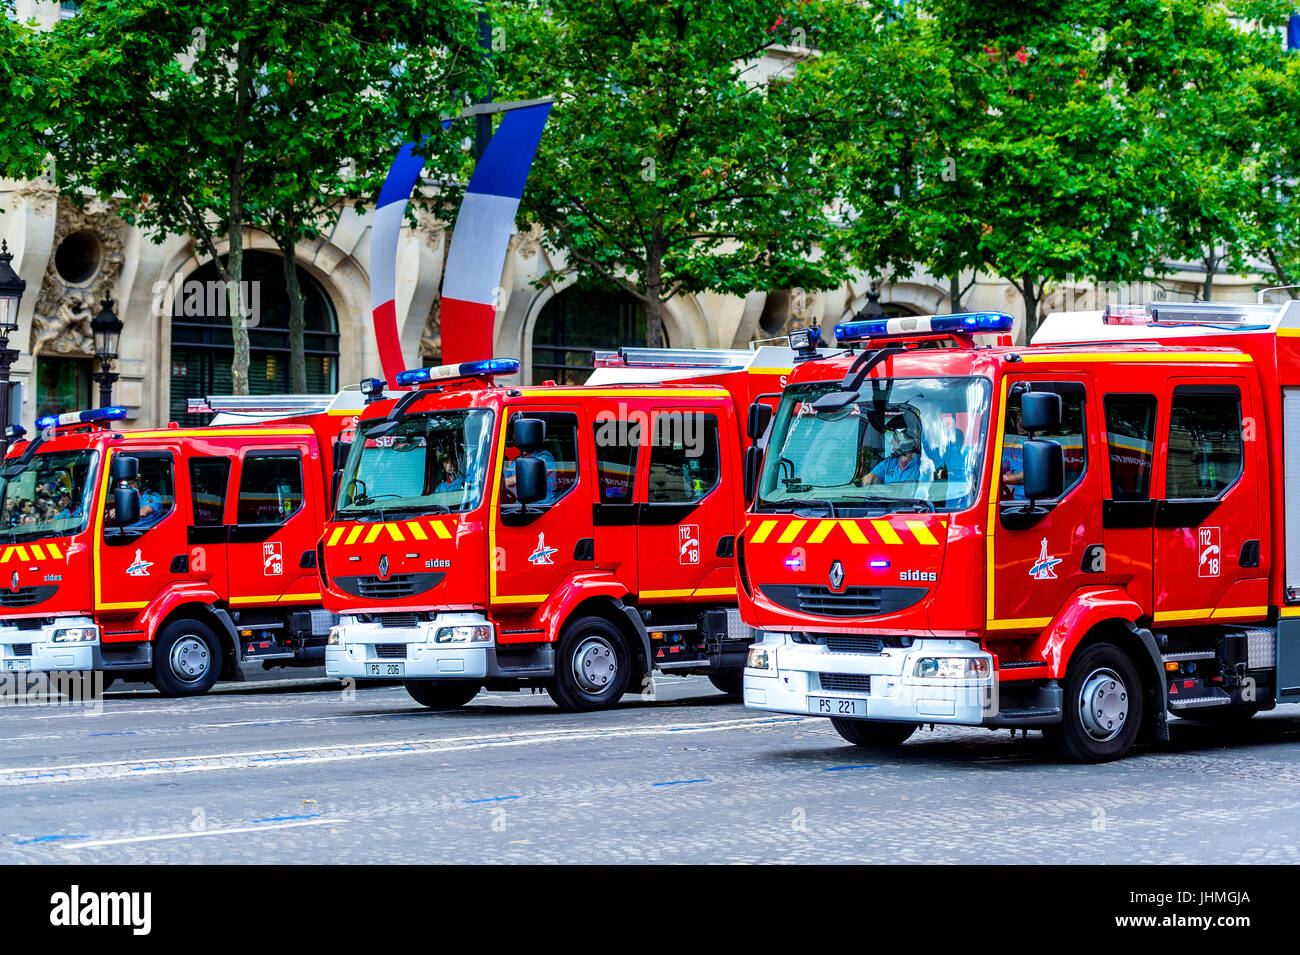 Paris, France. 14 Juy 17. French Military and Police put on a strong display on Bastille Day parade. Credit: Samantha Ohlsen/Alamy Live News Stock Photo